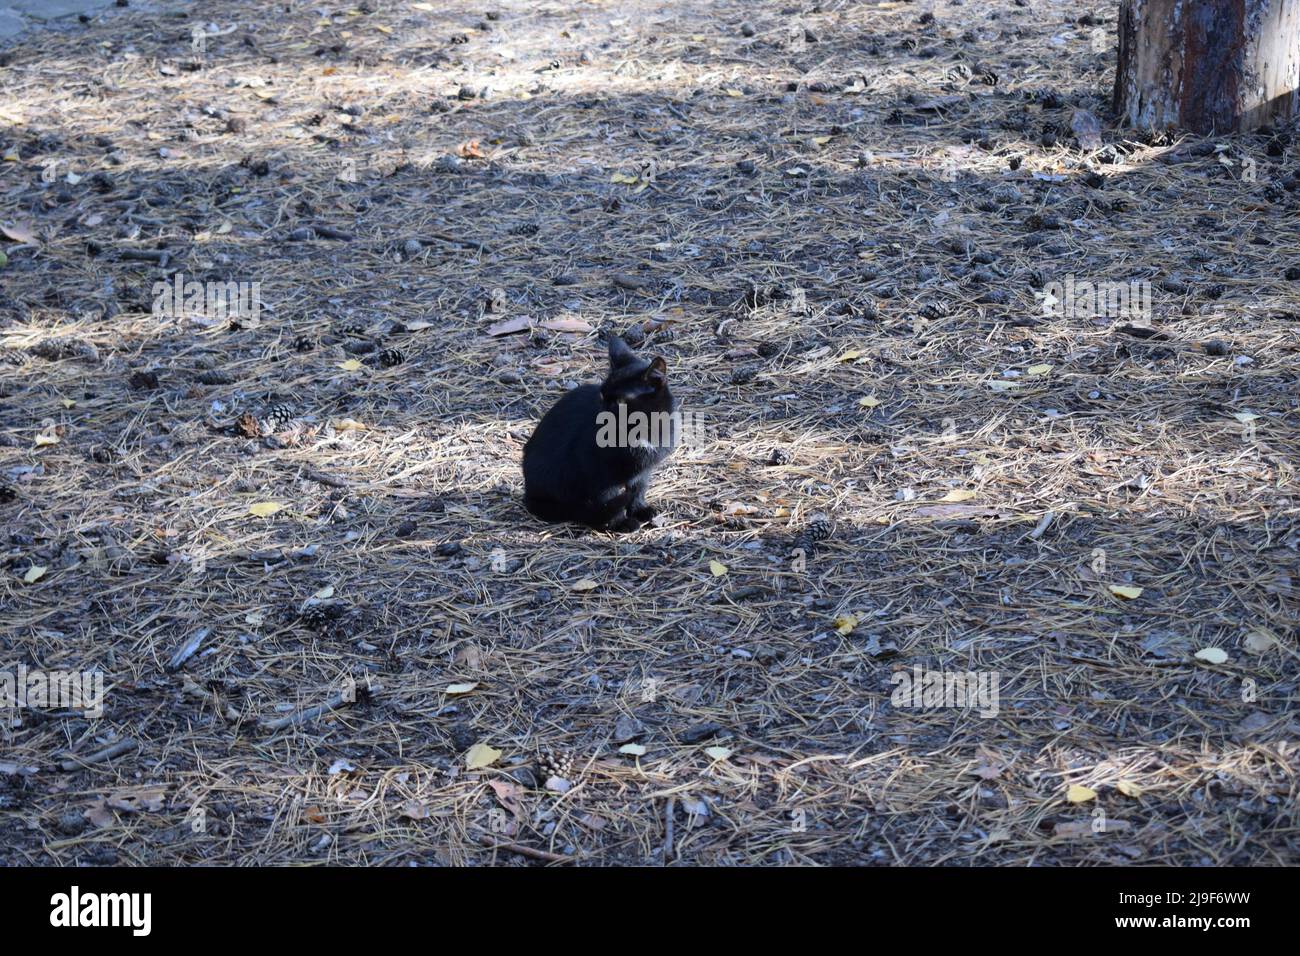 Black cat sits in the forest under the trees. Black cat portrait outdoors. Selective focus photo of a black cat sitting on a path in a pine forest in Stock Photo